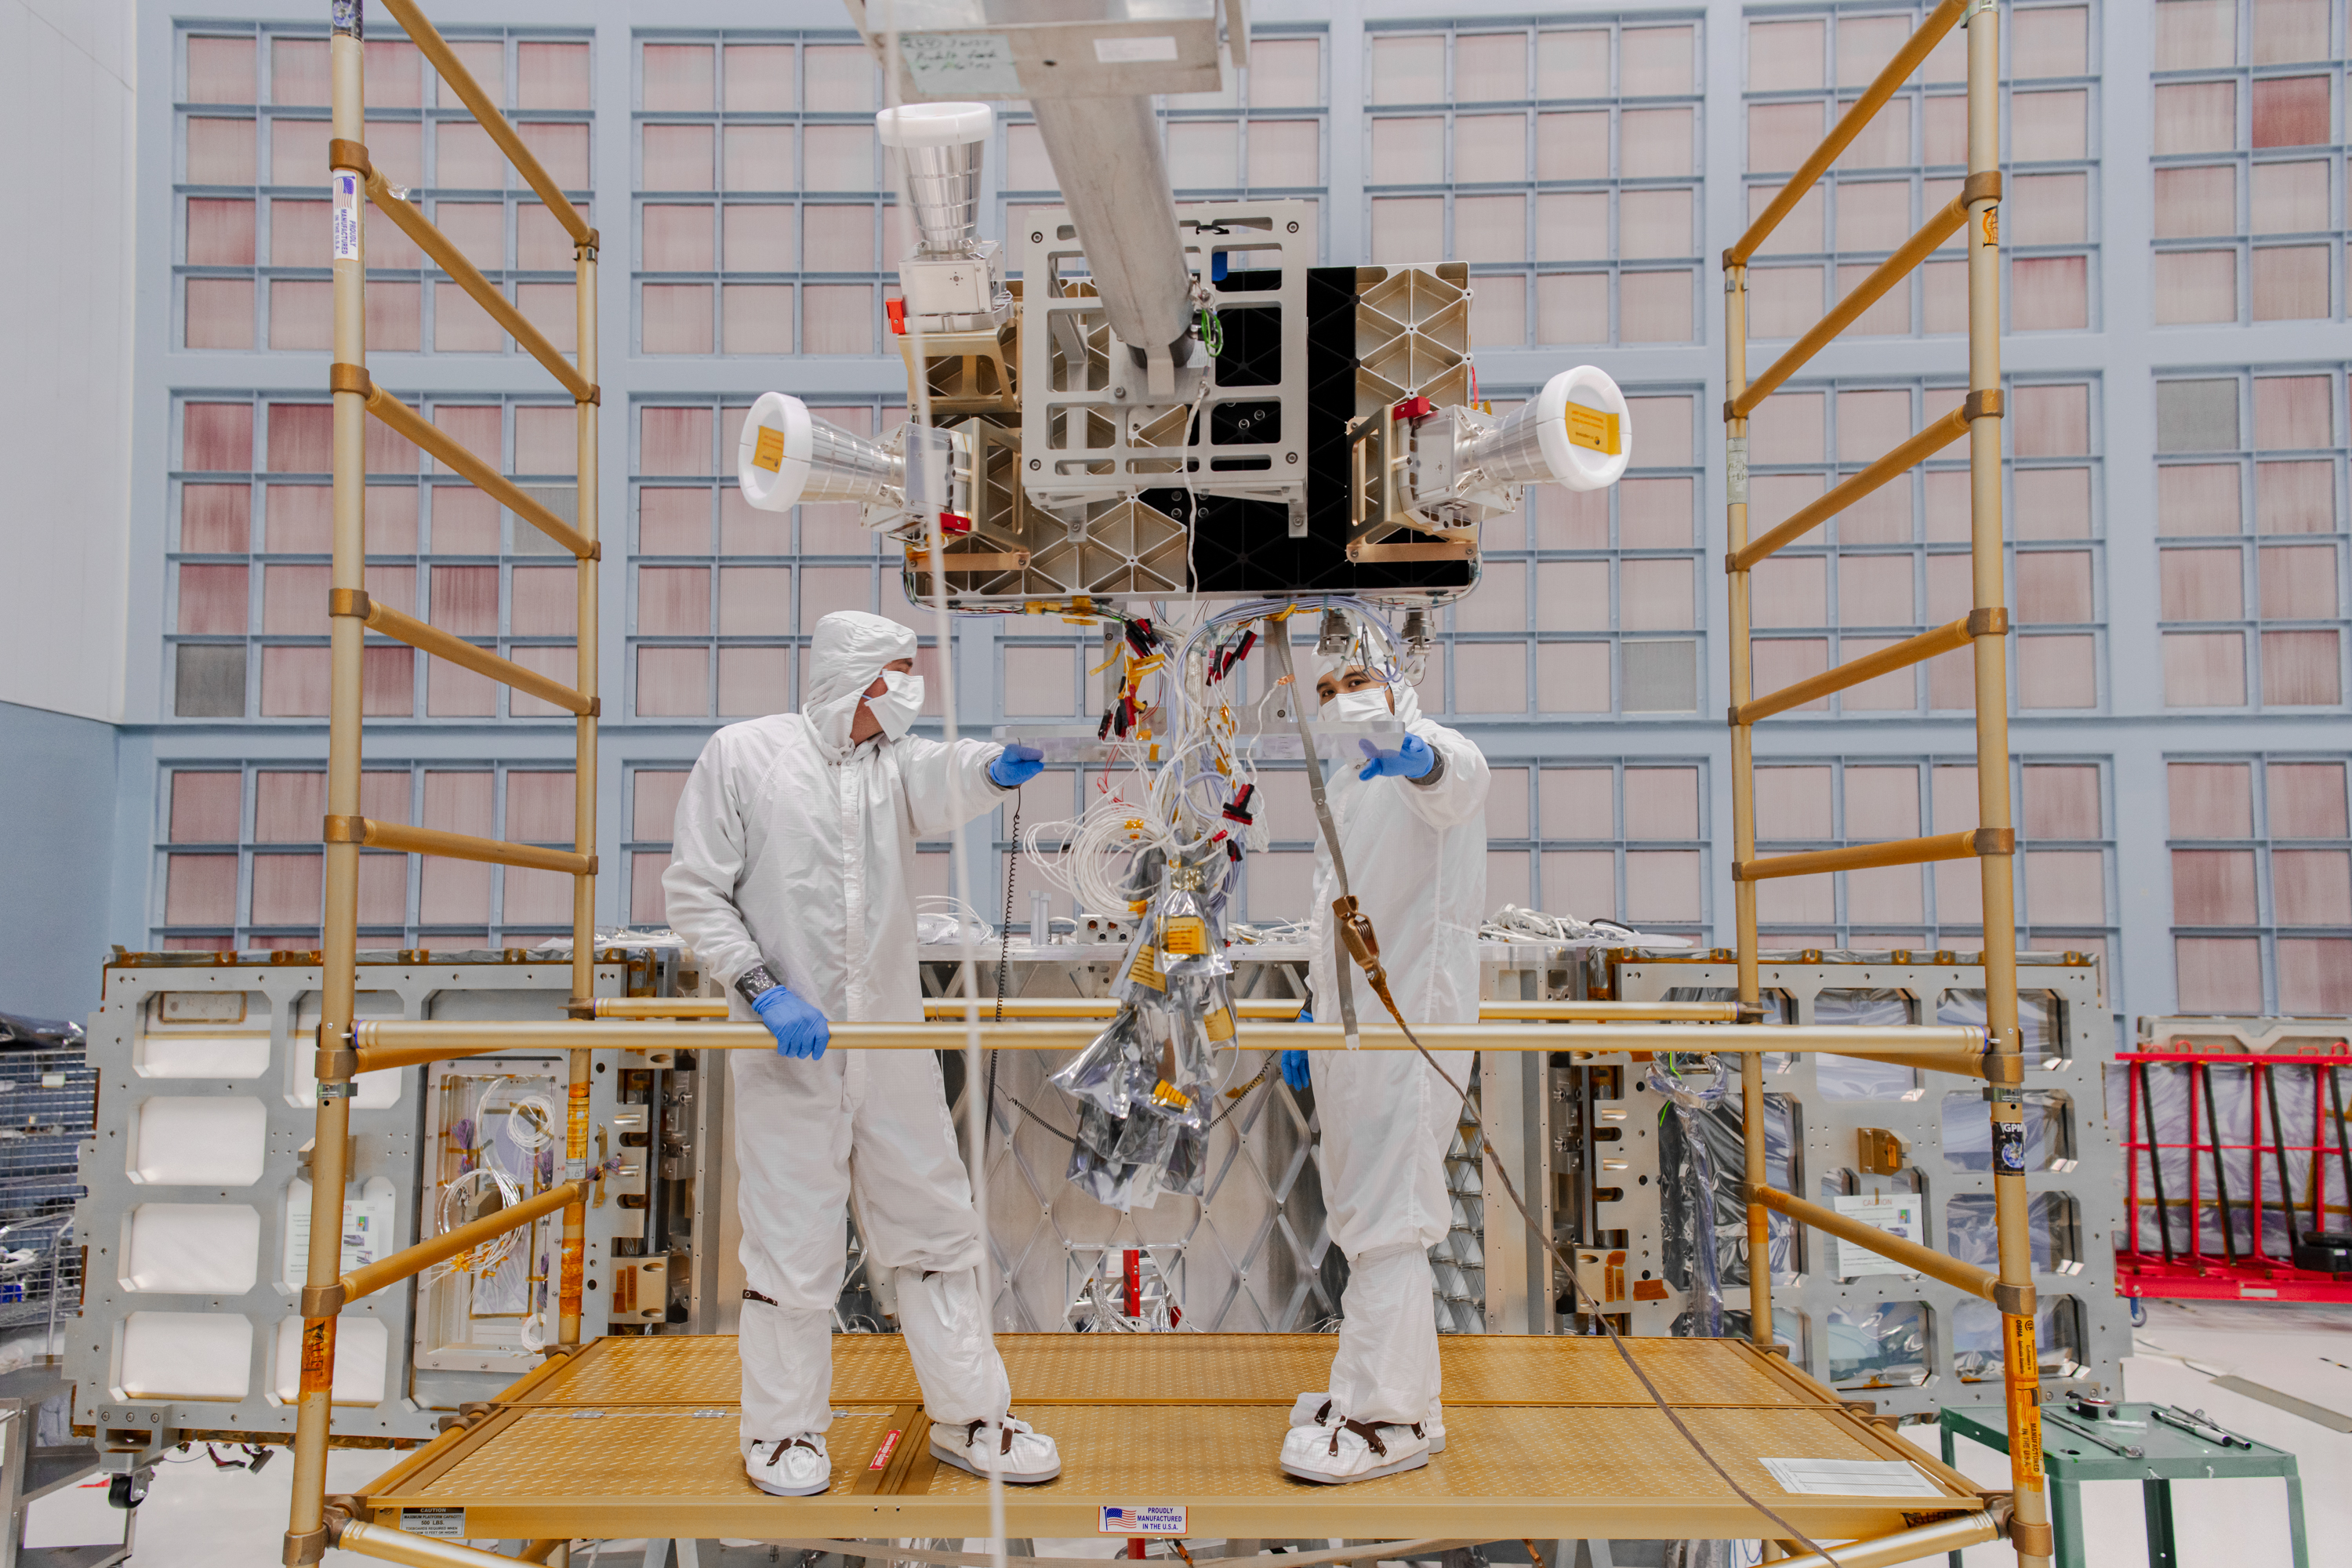 People are in head-to-toe white clean room jumpsuits with blue gloves. They are standing on a gold-colored platform facing forward. In the foreground is a device suspended horizontally from hanging metal rods. At the end of the rods is a large square box, with three white horn-shaped instruments around it. The back wall is covered in a grid of light pink squares, which are air filters. Photo credit: NASA/ Sydney Rohde